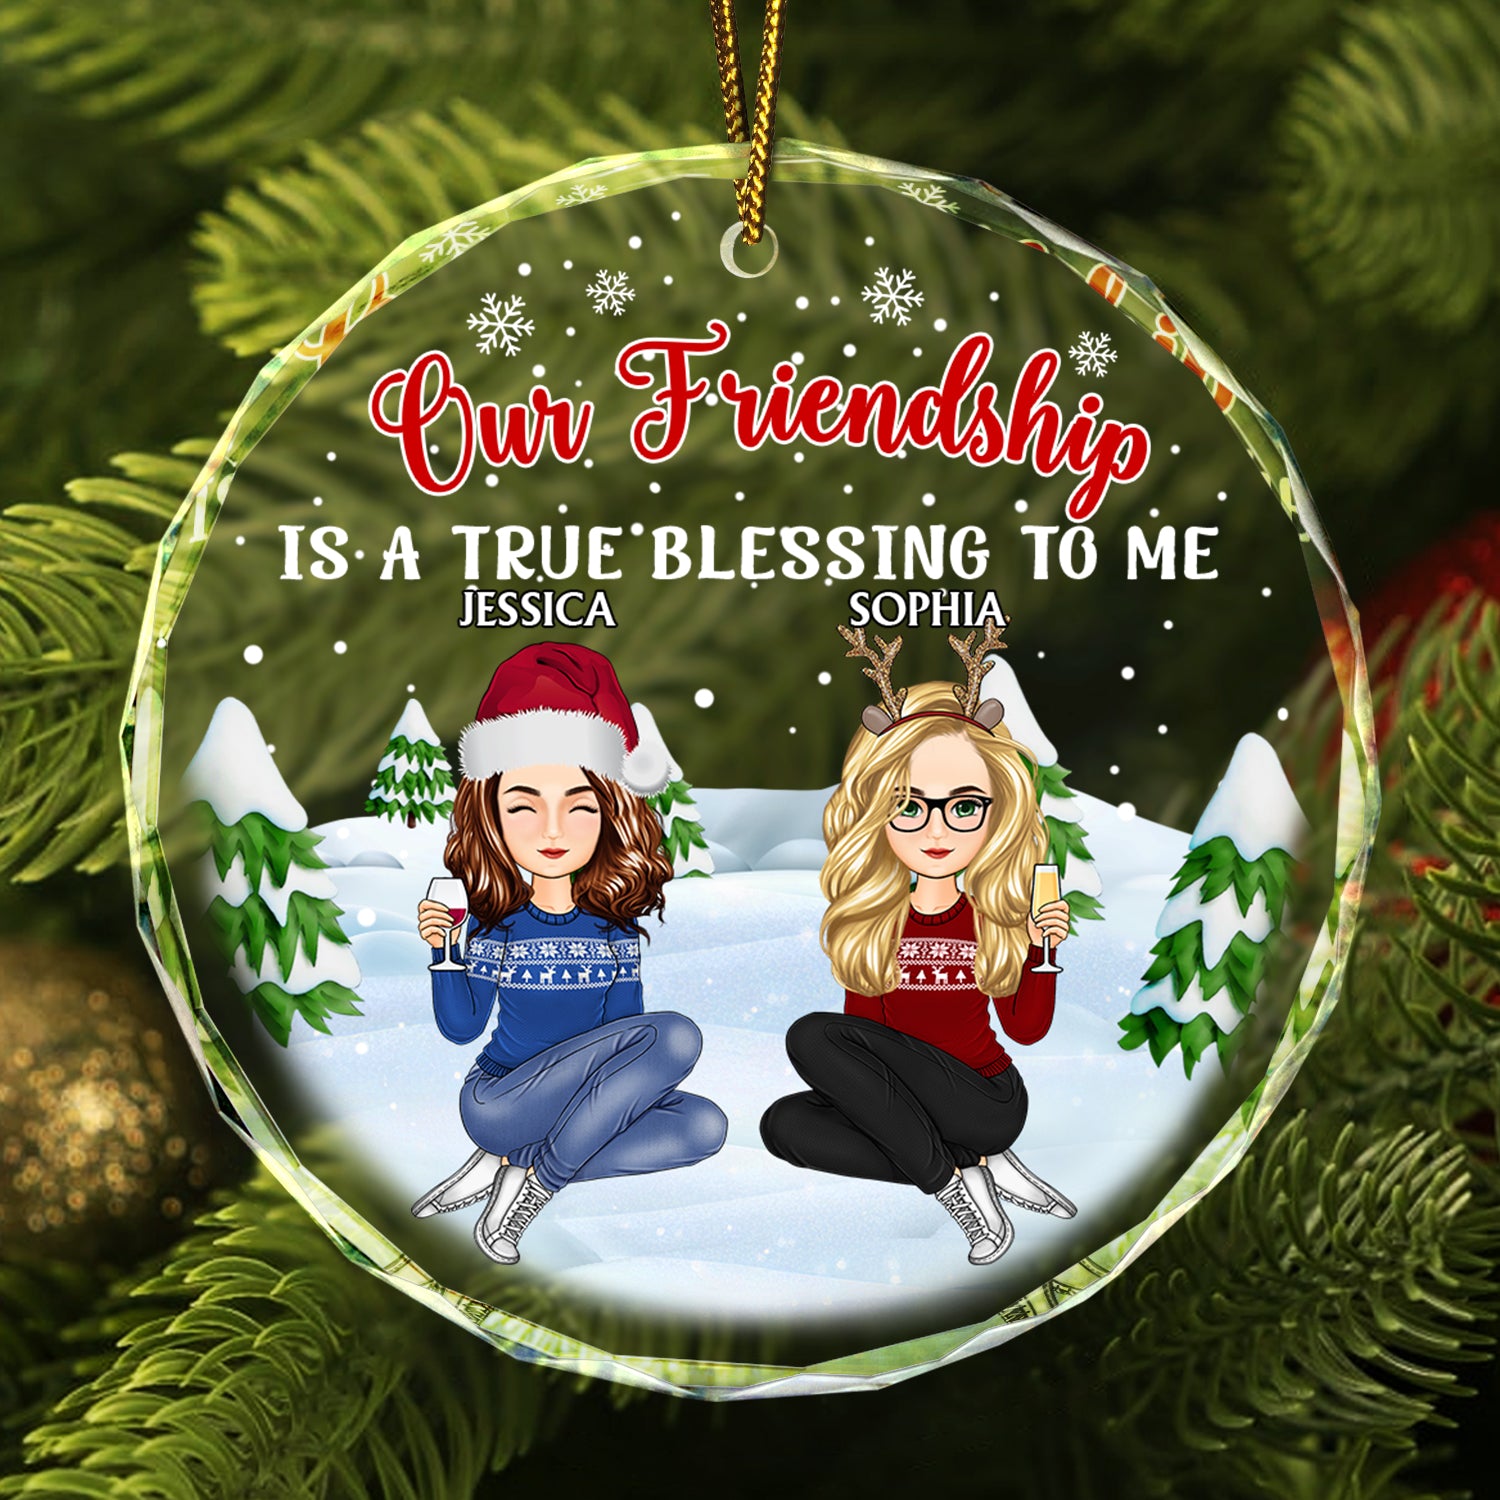 Our Friendship Is A True Blessing To Me - Christmas Gifts For Besties, Friends - Personalized Circle Glass Ornament